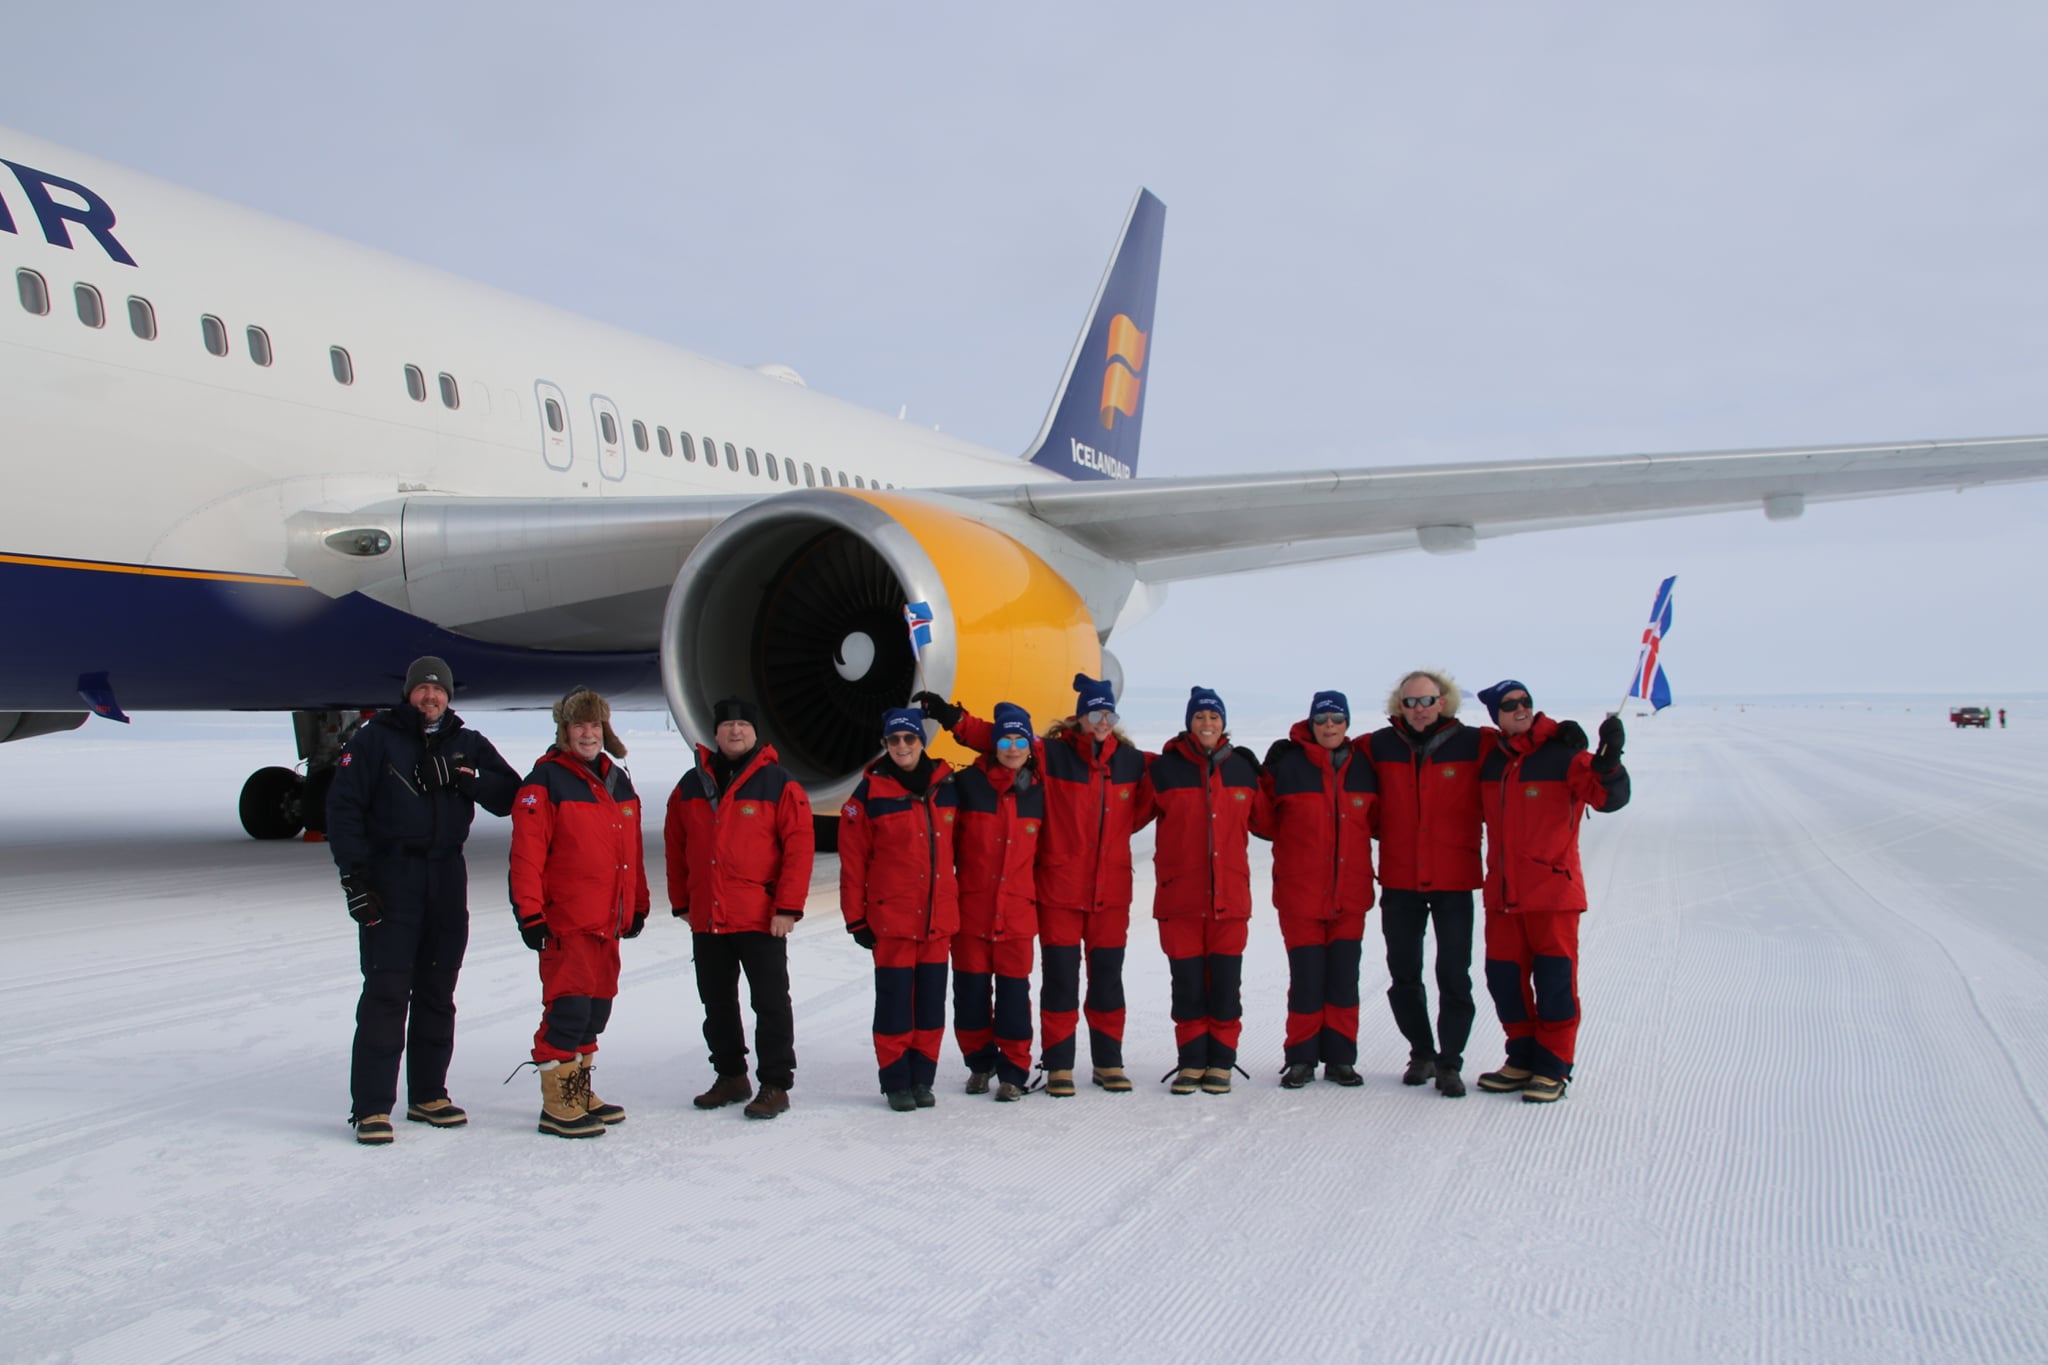 The Icelandair flight crew landing in Antarctica pictured in front of the Icelandair aircraft in red snow suits